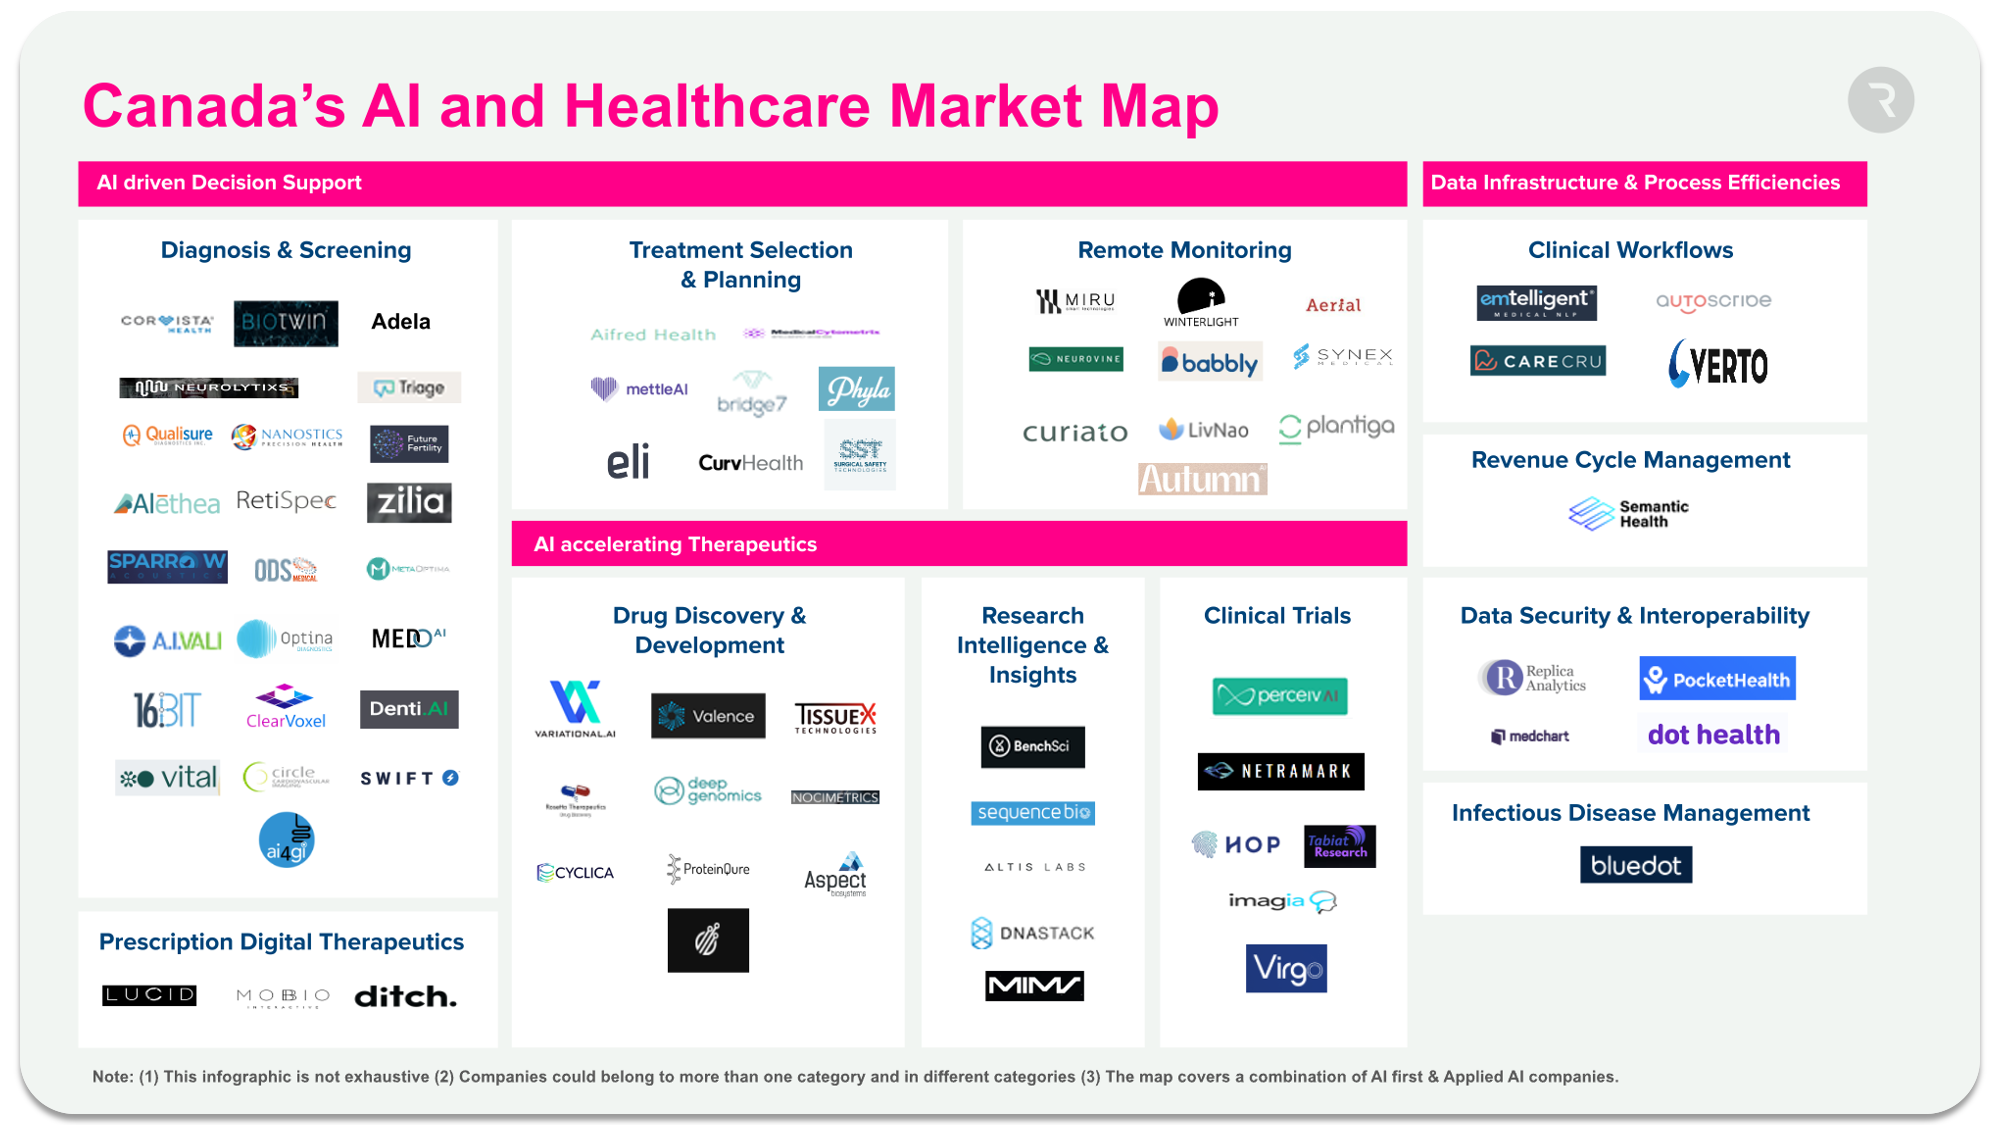 Canada's AI and Healthcare Market Map. Companies are divided into categories: AI driven Decision Support, AI accelerating Therapeutics, and Data Infrastructure and Process Efficiencies